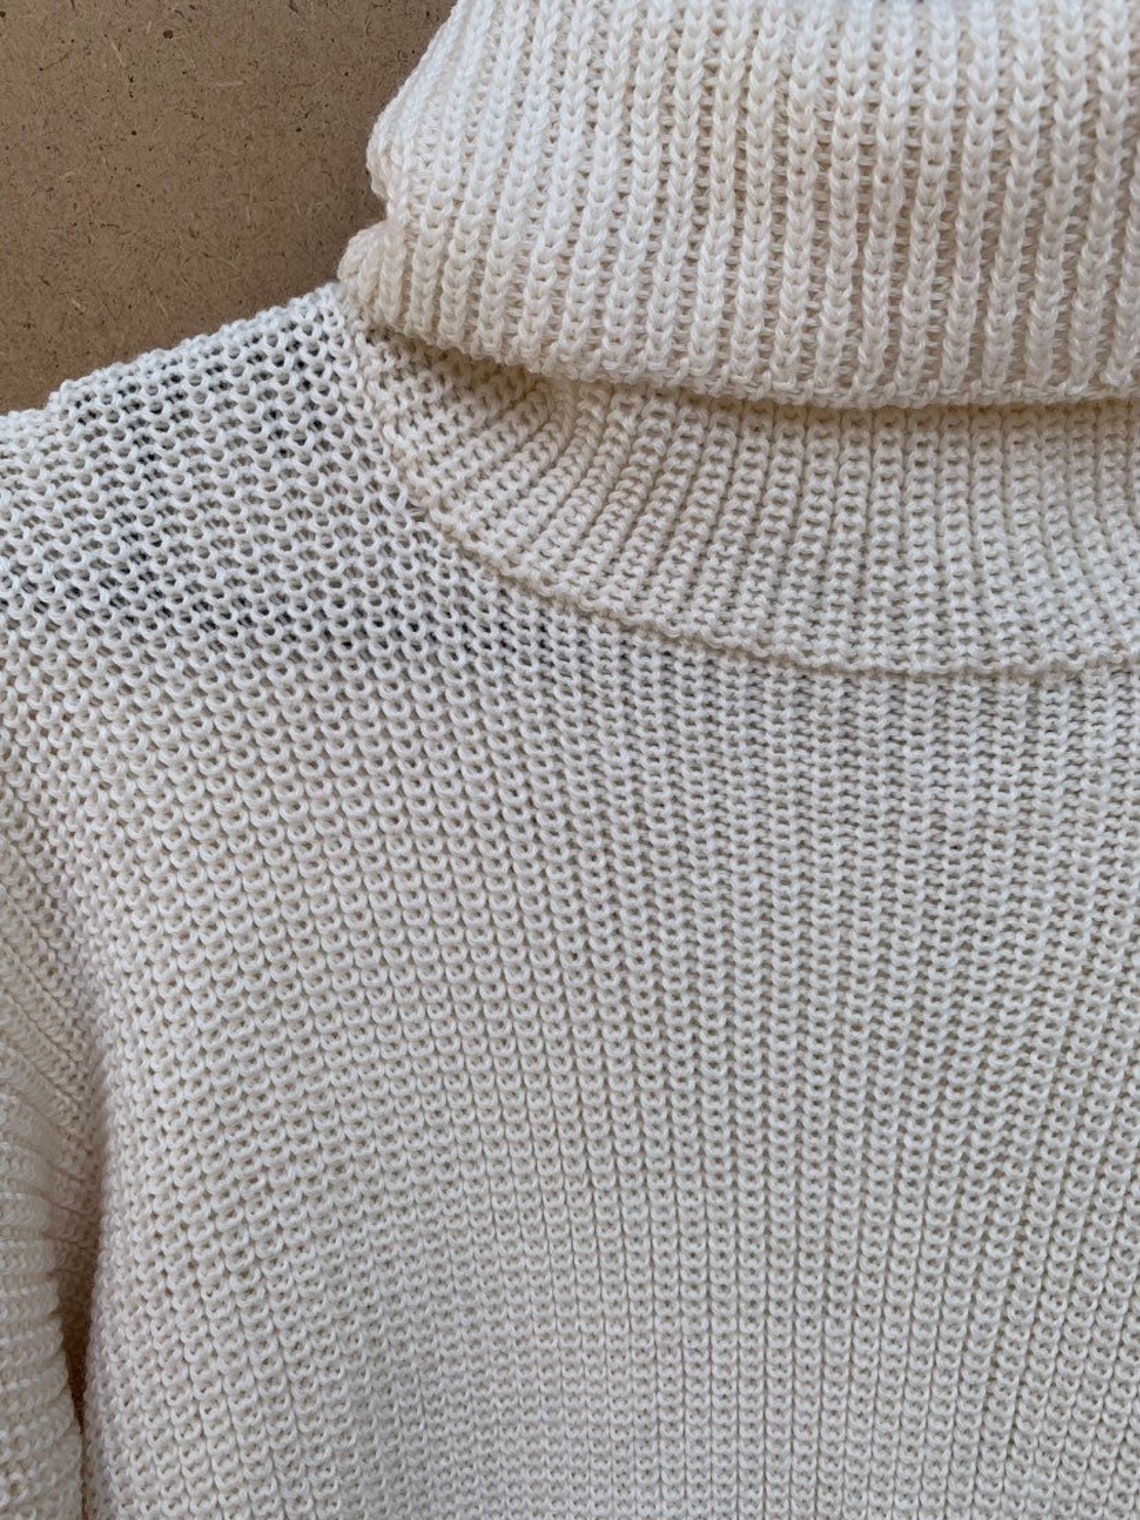 Super Long White Sweater With Incision Turtle Neck Sweater | Etsy